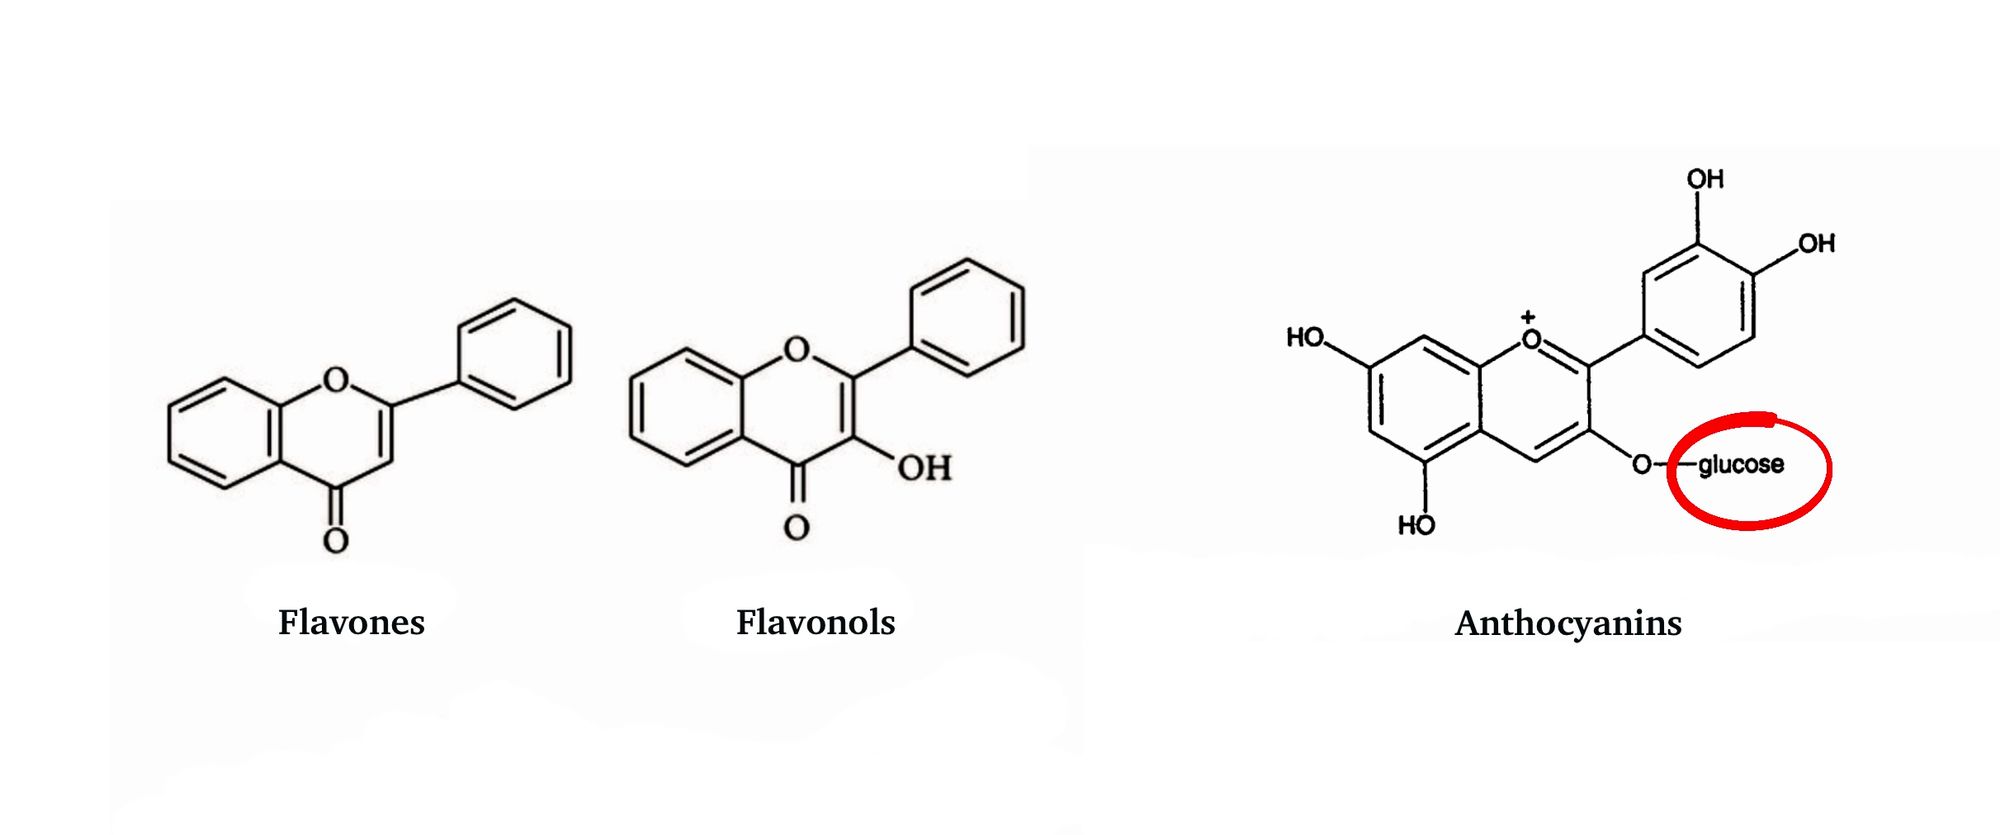  chemical structure of flavonoids